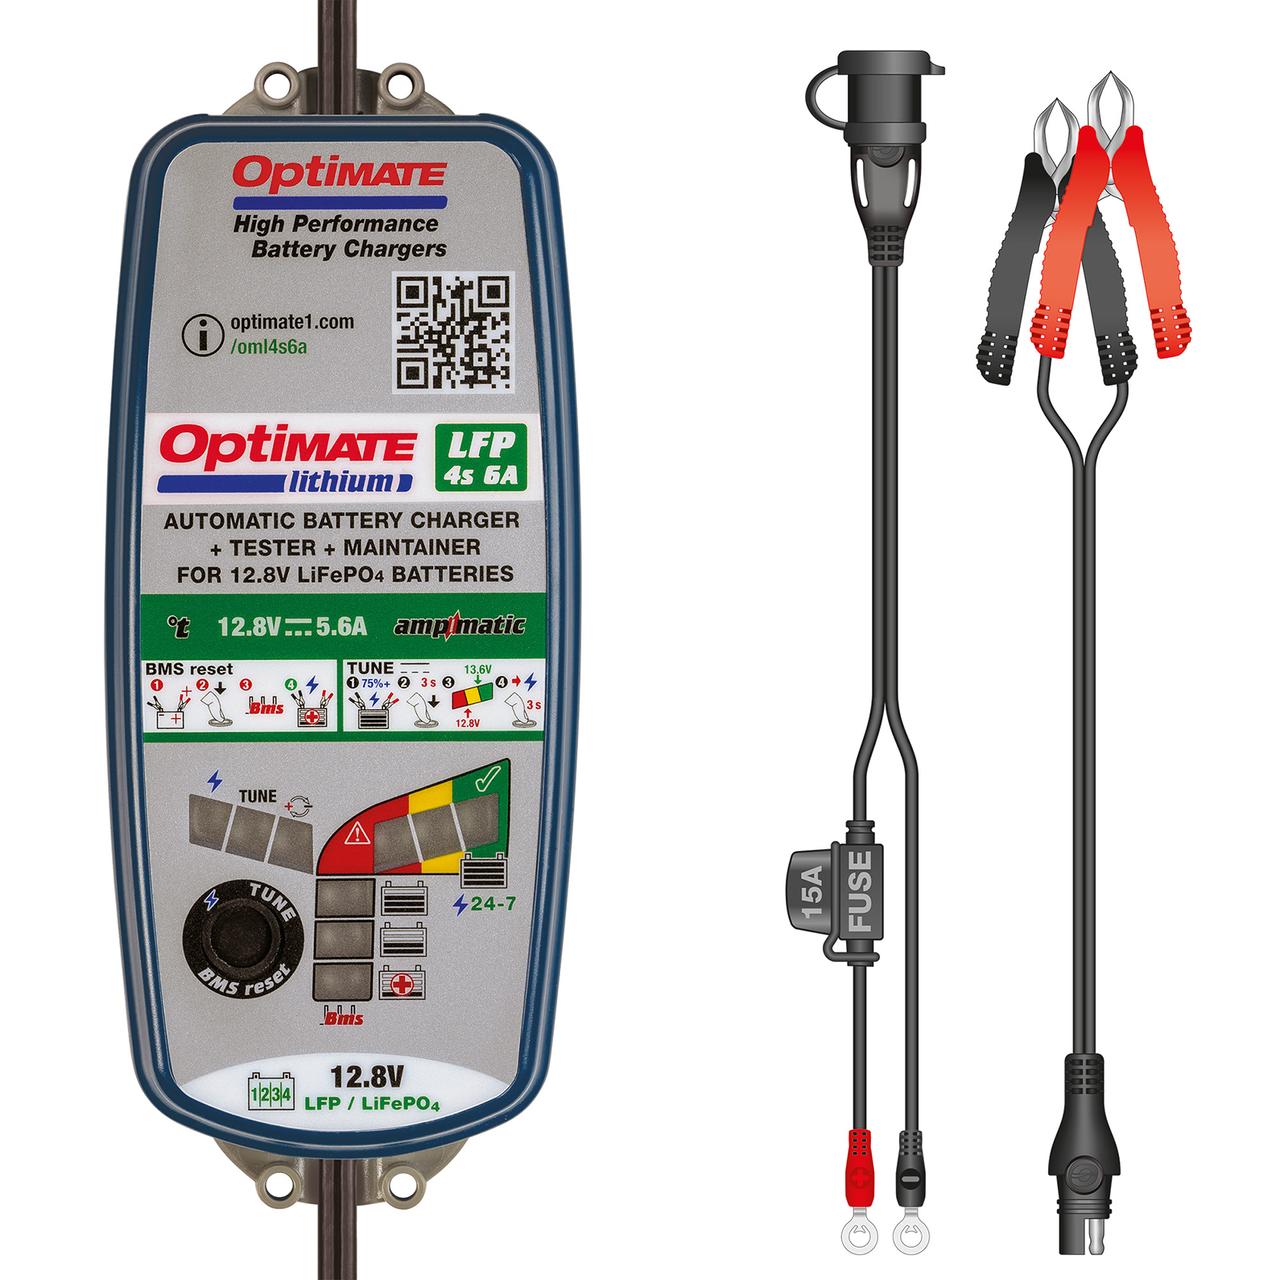 Optimate Lithium 6 Amp Lithium Battery Charger